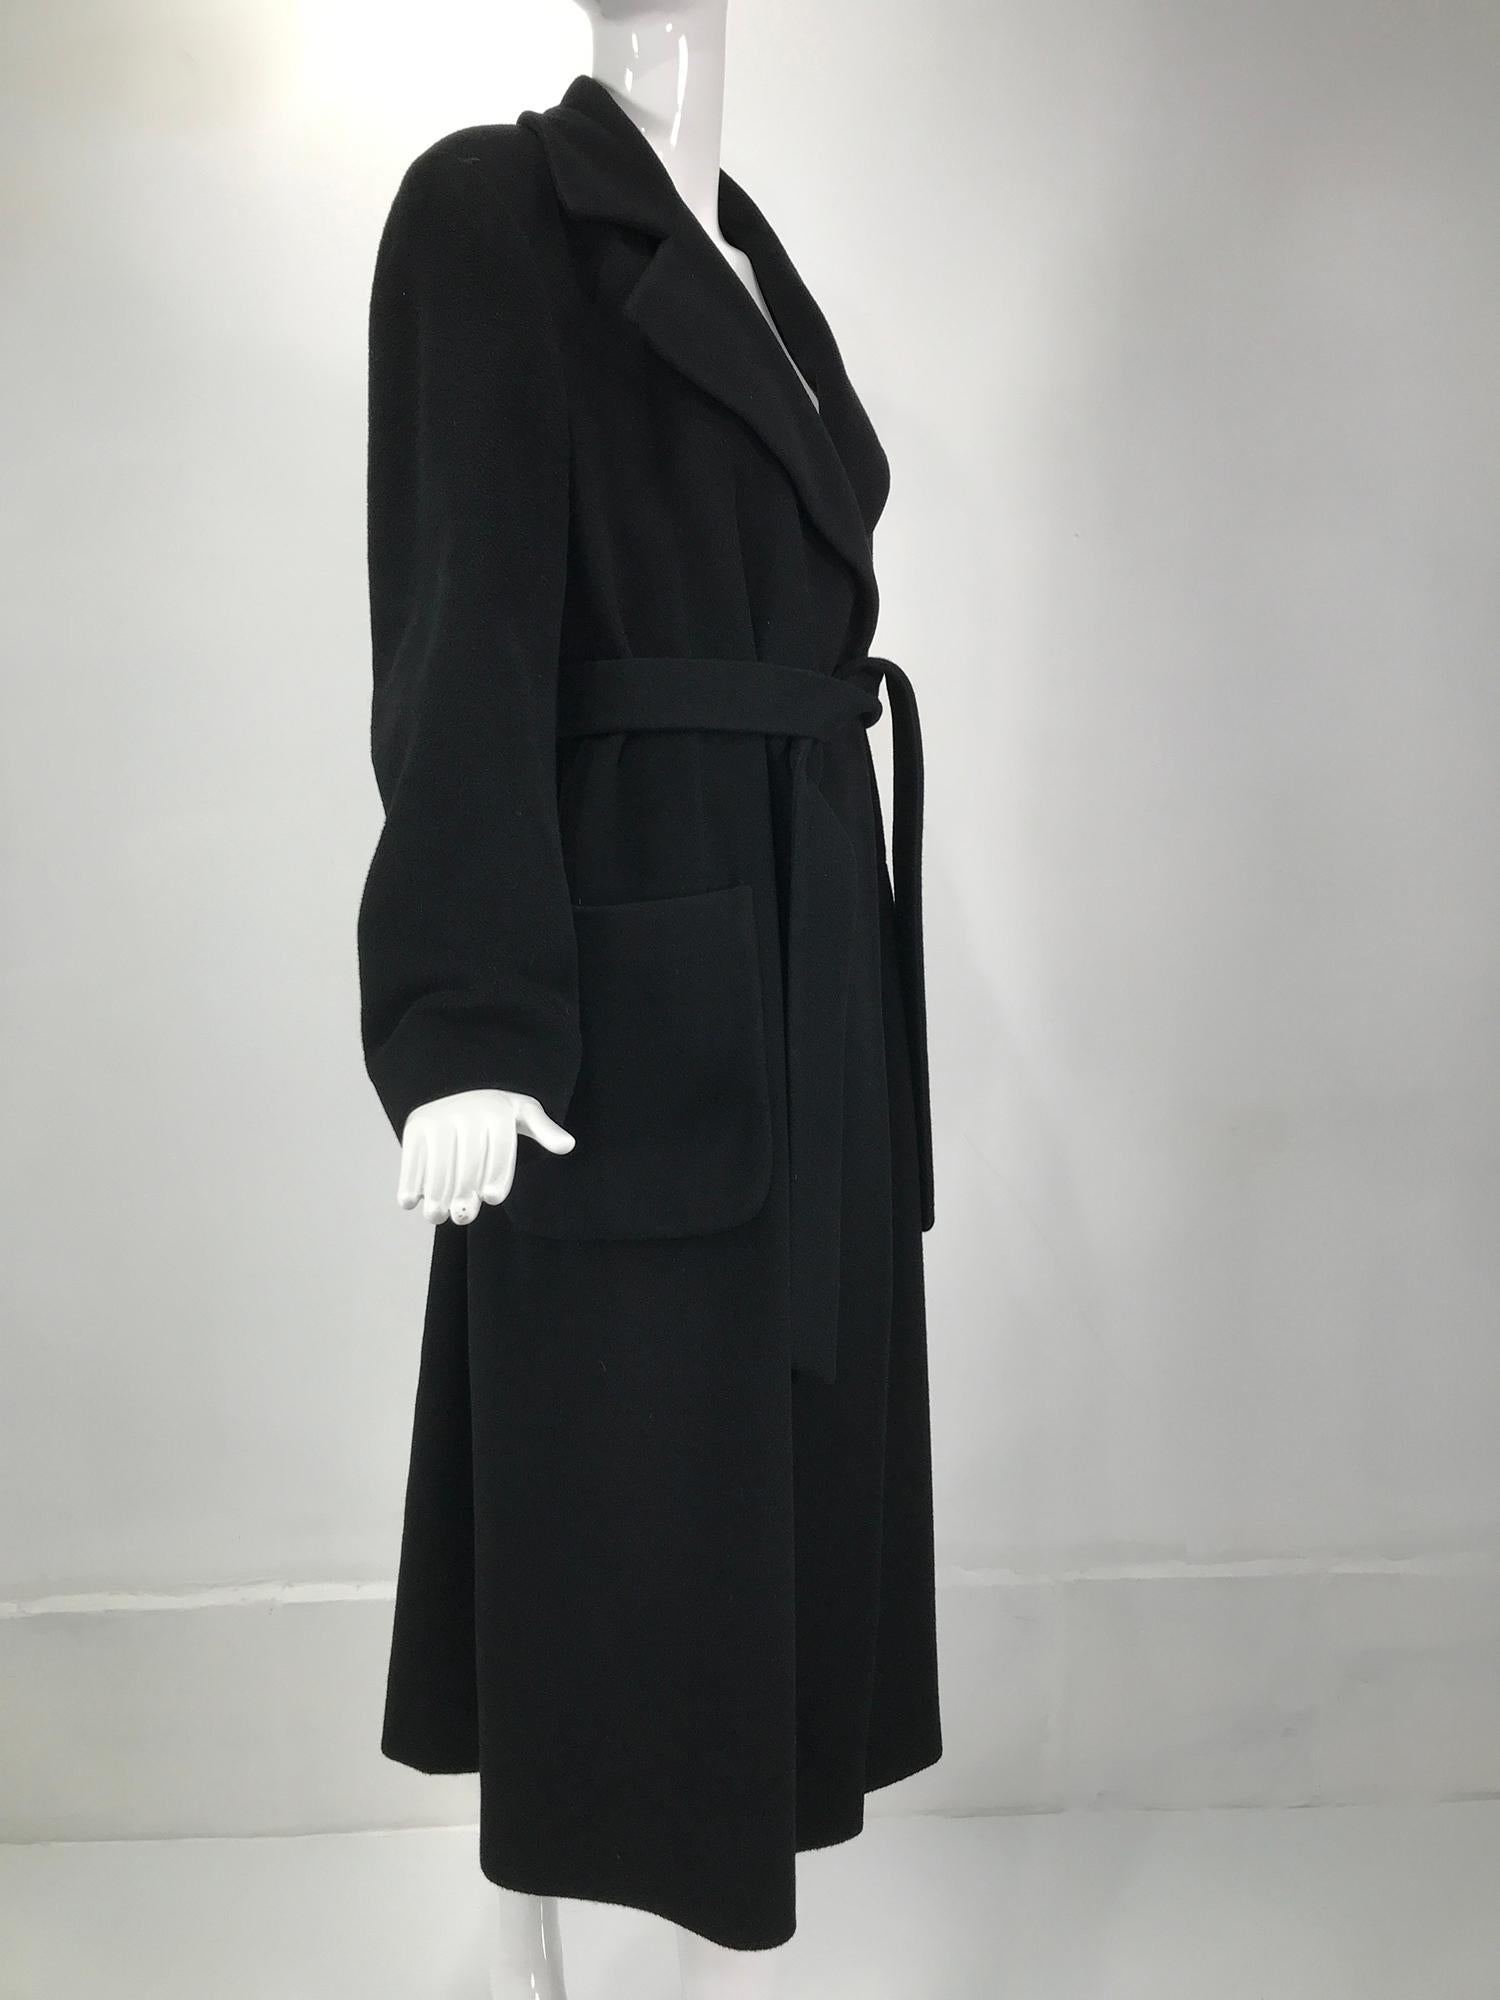 Donna Karan black cashmere wrap coat size 10. Sleek and eternally stylish the wrap coat can go anywhere. Belted coat with deep lapels, long sleeves and hidden button closure at the waist, the coat closes with it's own self cashmere belt. Fully lined